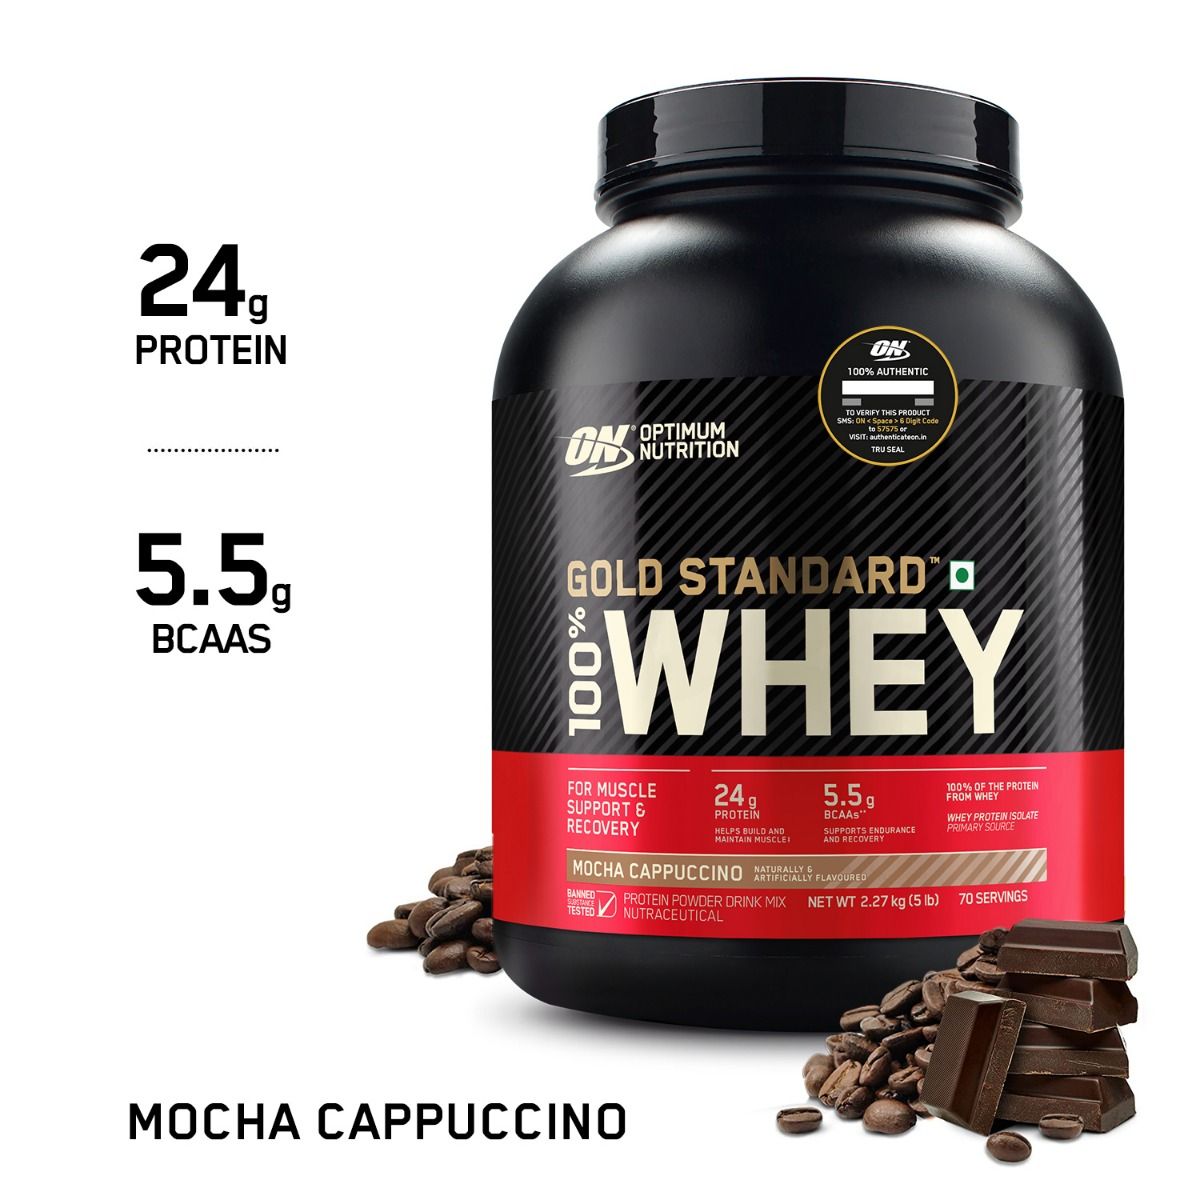 Optimum Nutrition (ON) Gold Standard 100% Whey Protein Mocha Cappuccino Flavour Powder, 5 lb, Pack of 1 